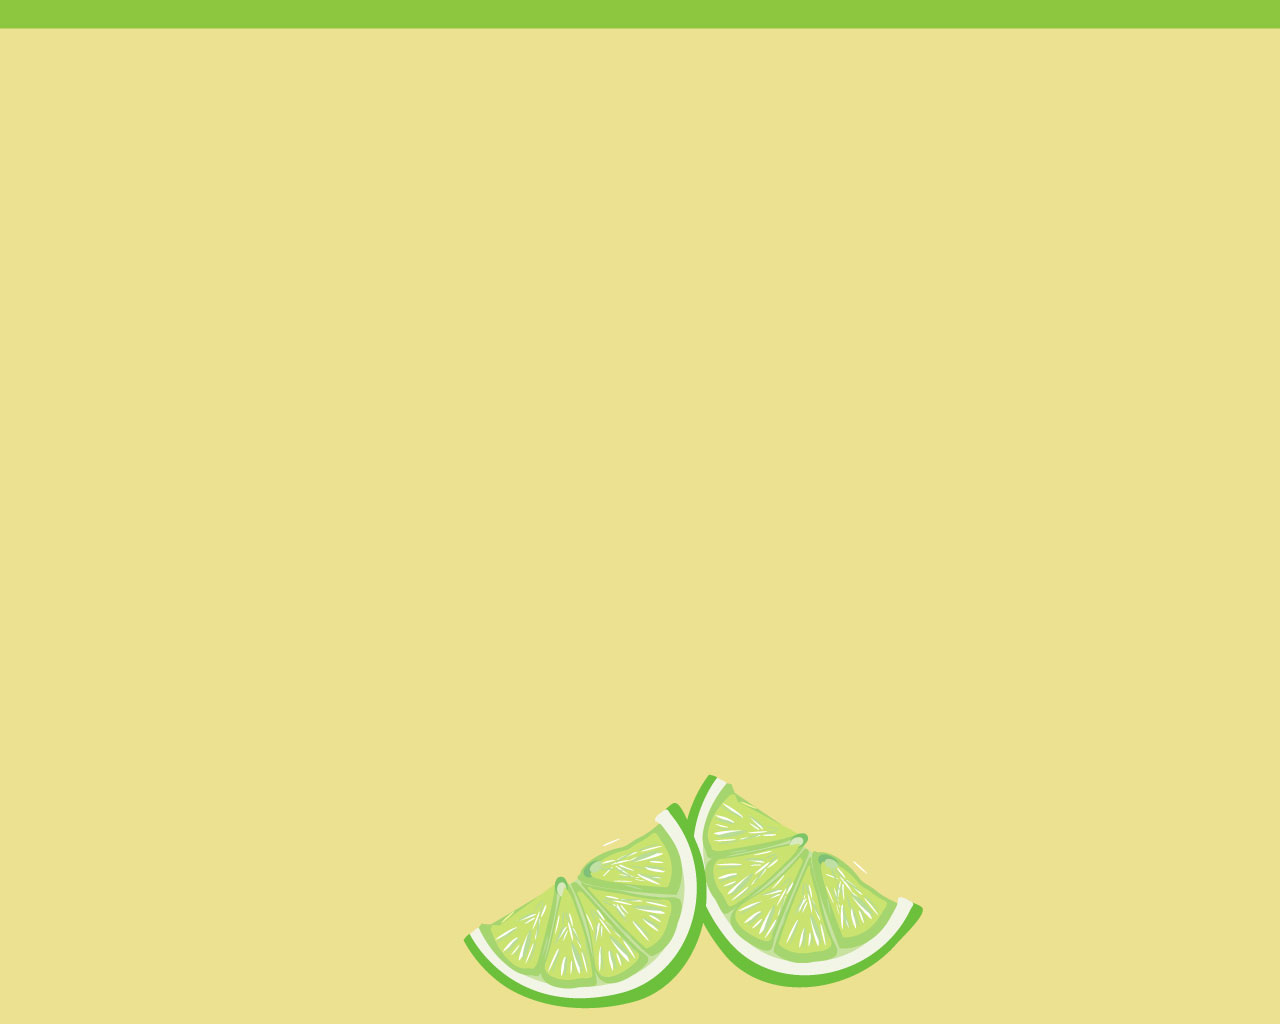 Lemon two slices powerpoint background